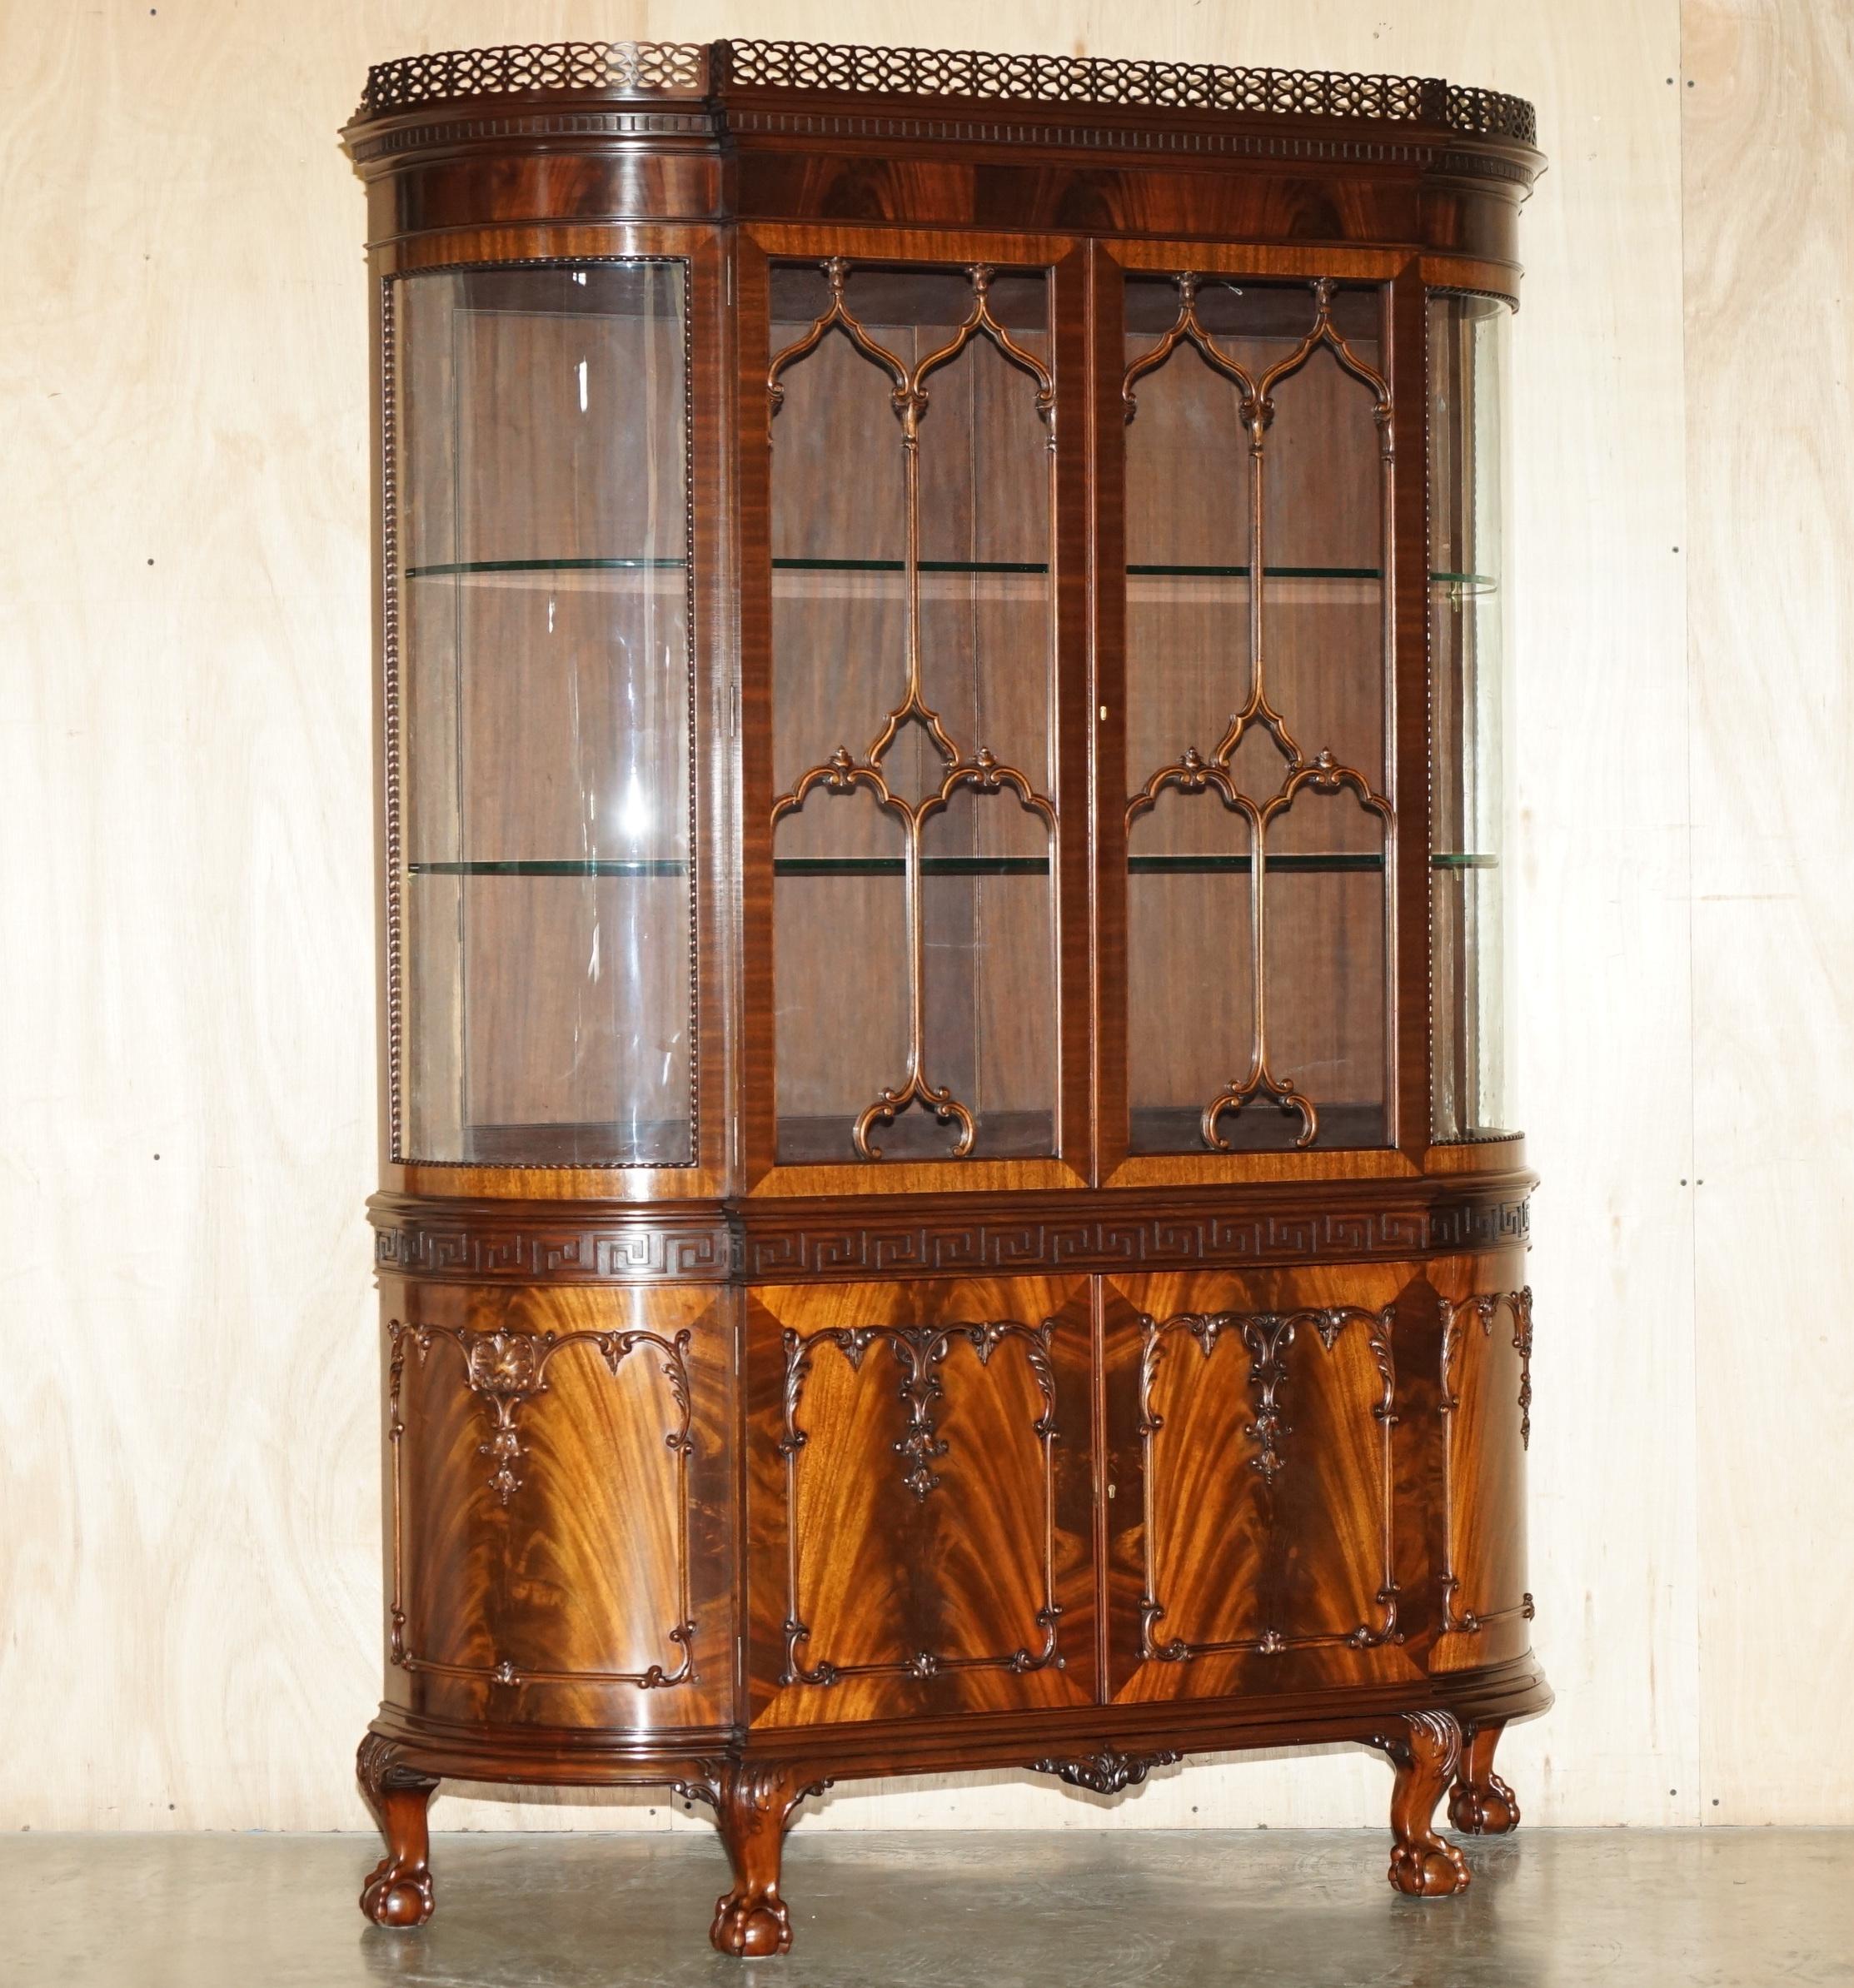 Royal House Antiques

Royal House Antiques is delighted to offer for sale this absolutely exquisite Charles Baker of Chippendale House stamped, Flamed Mahogany, domed front display cabinet with hand carved Claw & Ball feet

Please note the delivery